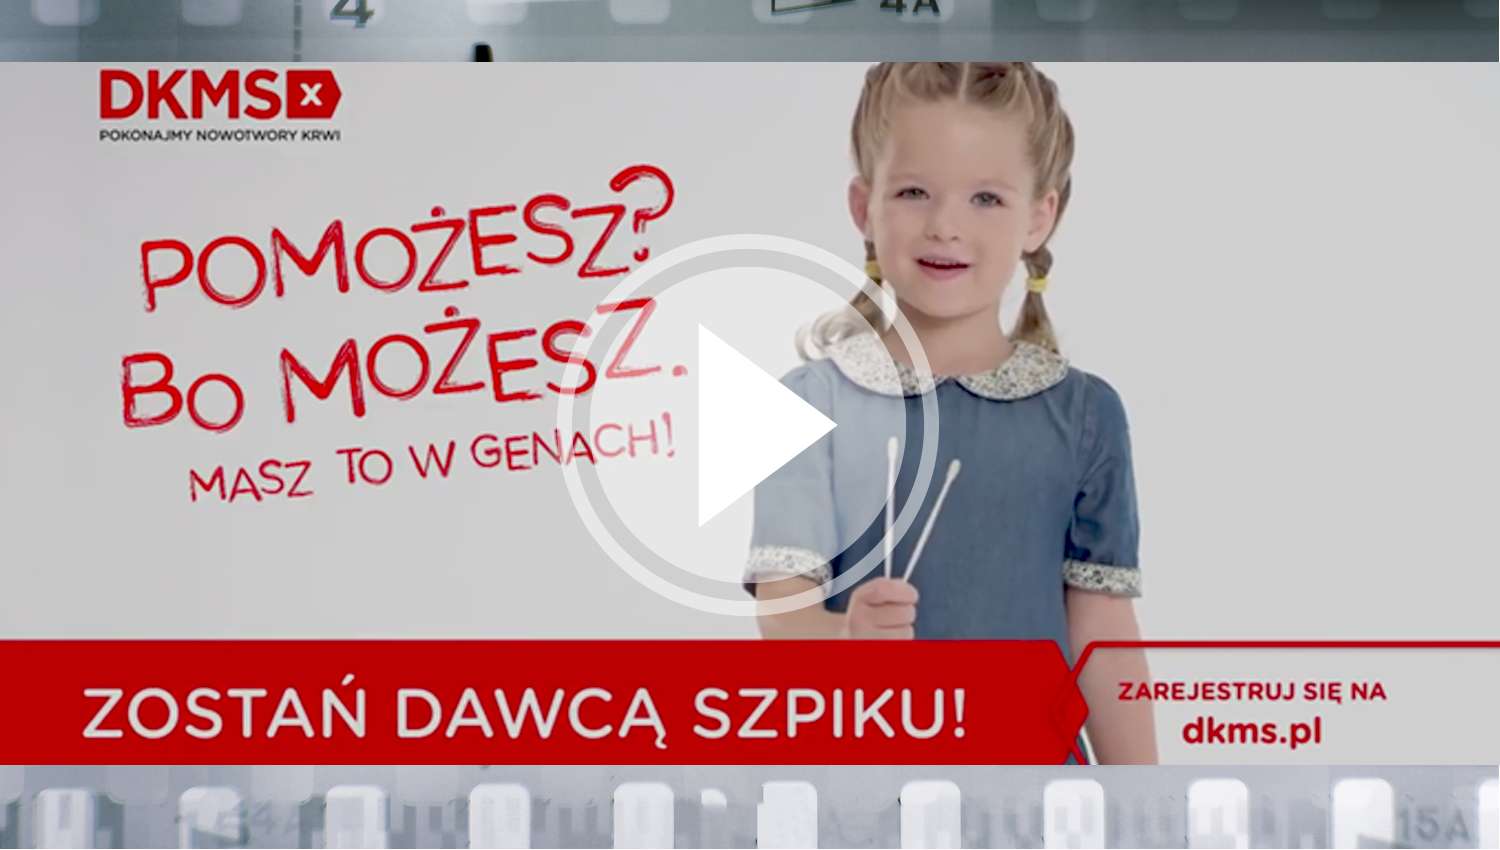 Eskadra - WILL YOU HELP? YOU CAN DO IT, IT’S IN YOUR GENES! - DKMS